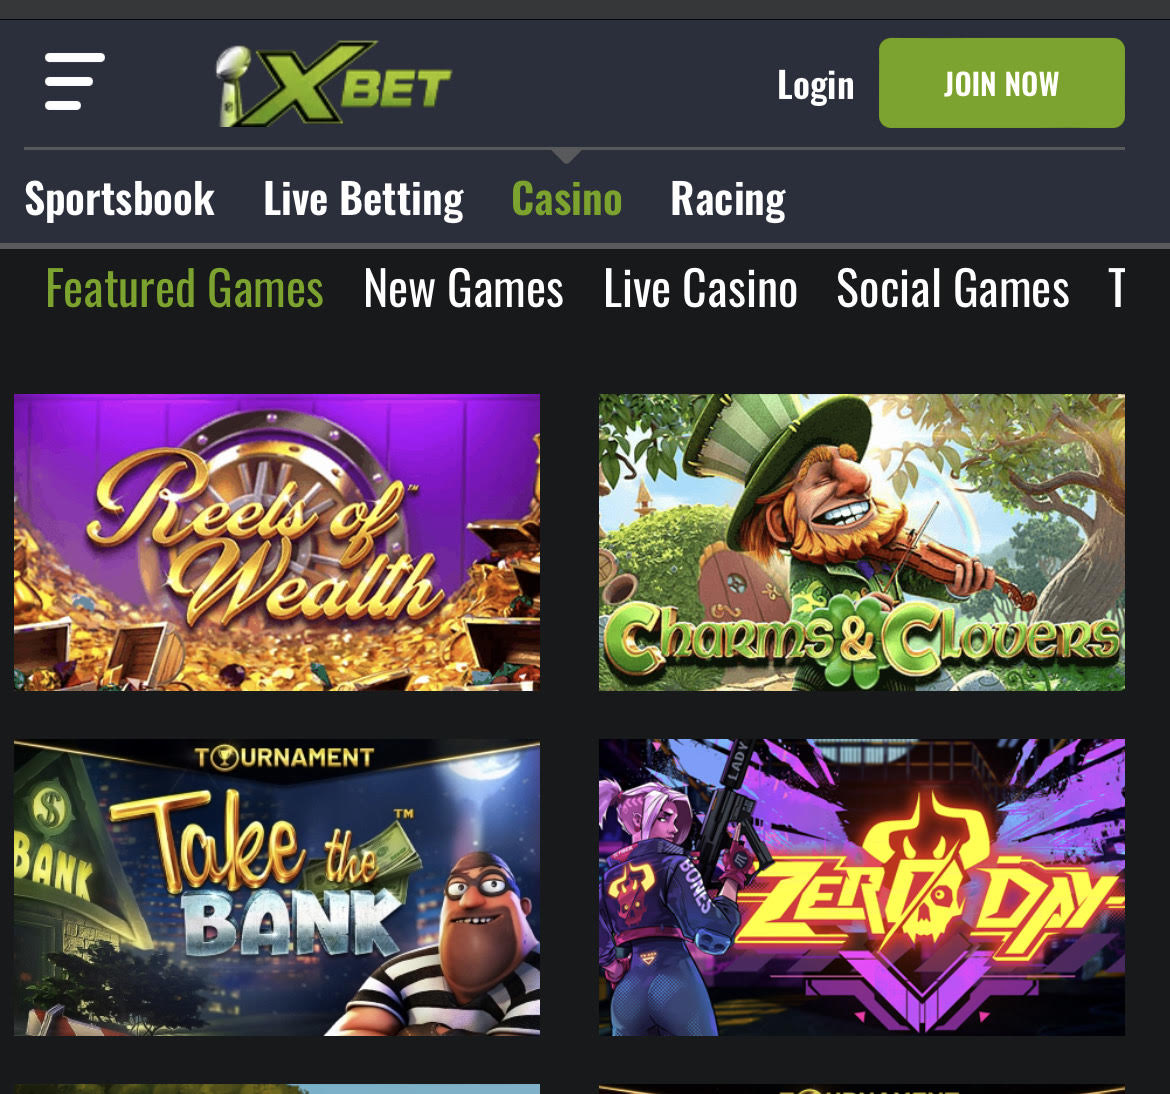 XBet Mobile